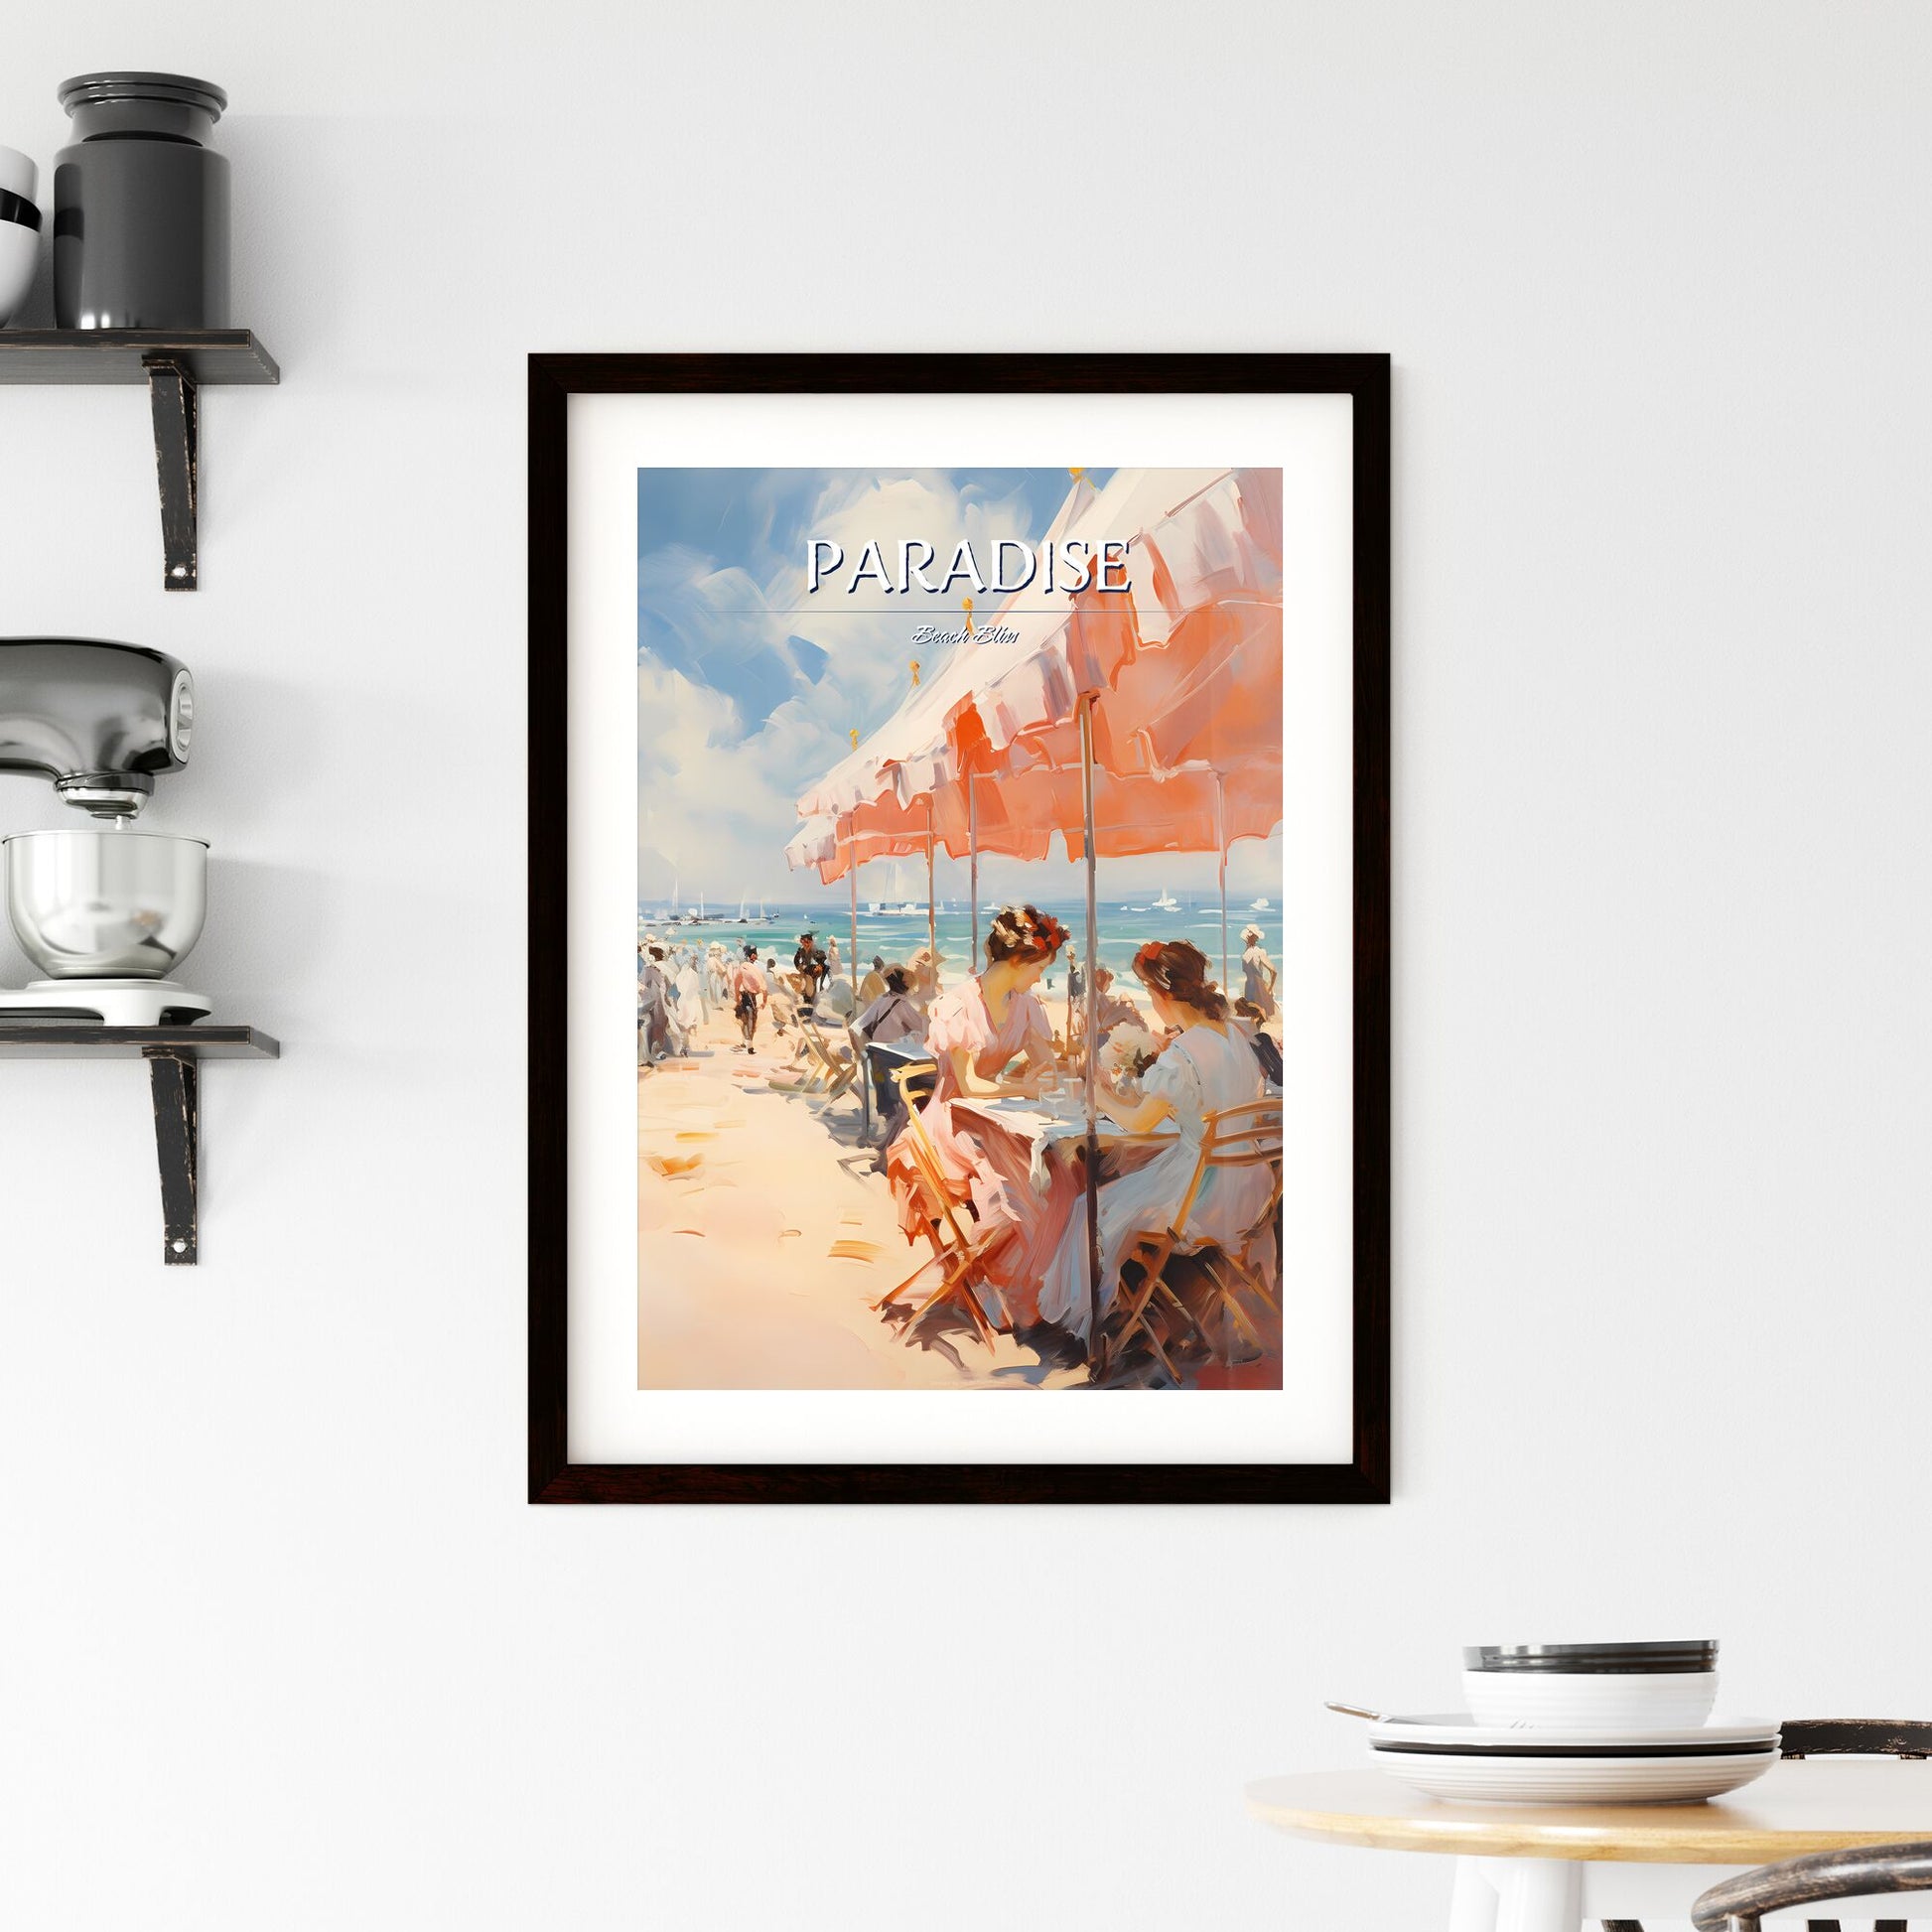 A Group Of People Sitting At A Table Under An Umbrella On A Beach Default Title